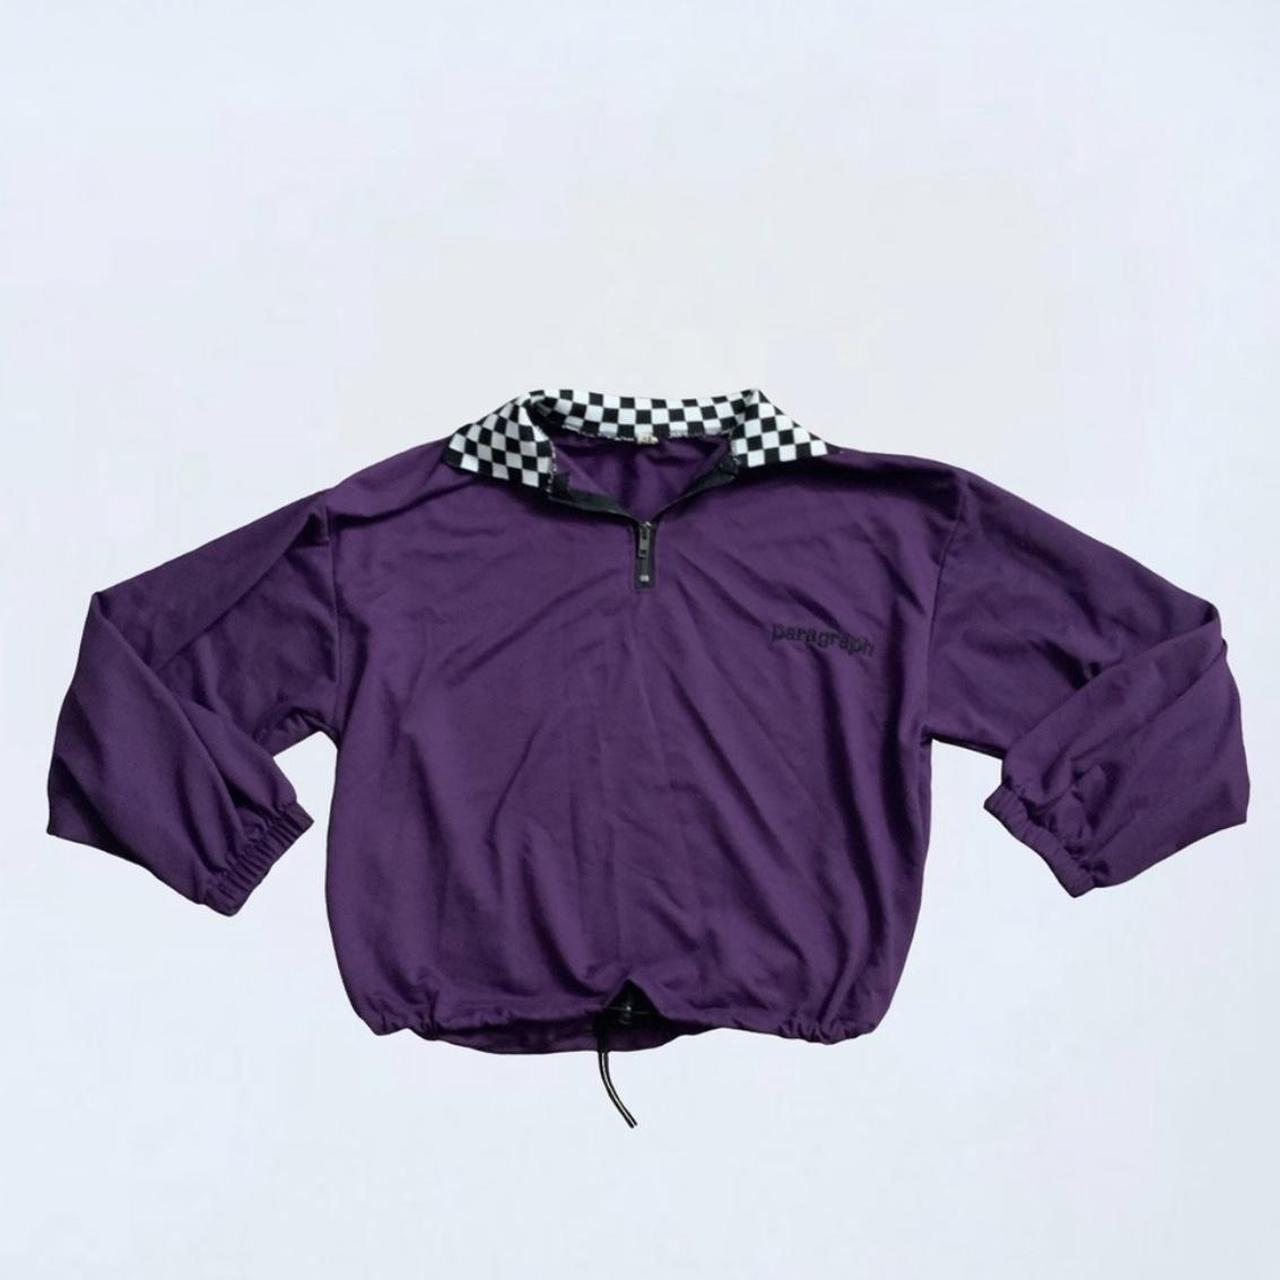 Product Image 1 - Checkered purple sweater from Yesstyle
One